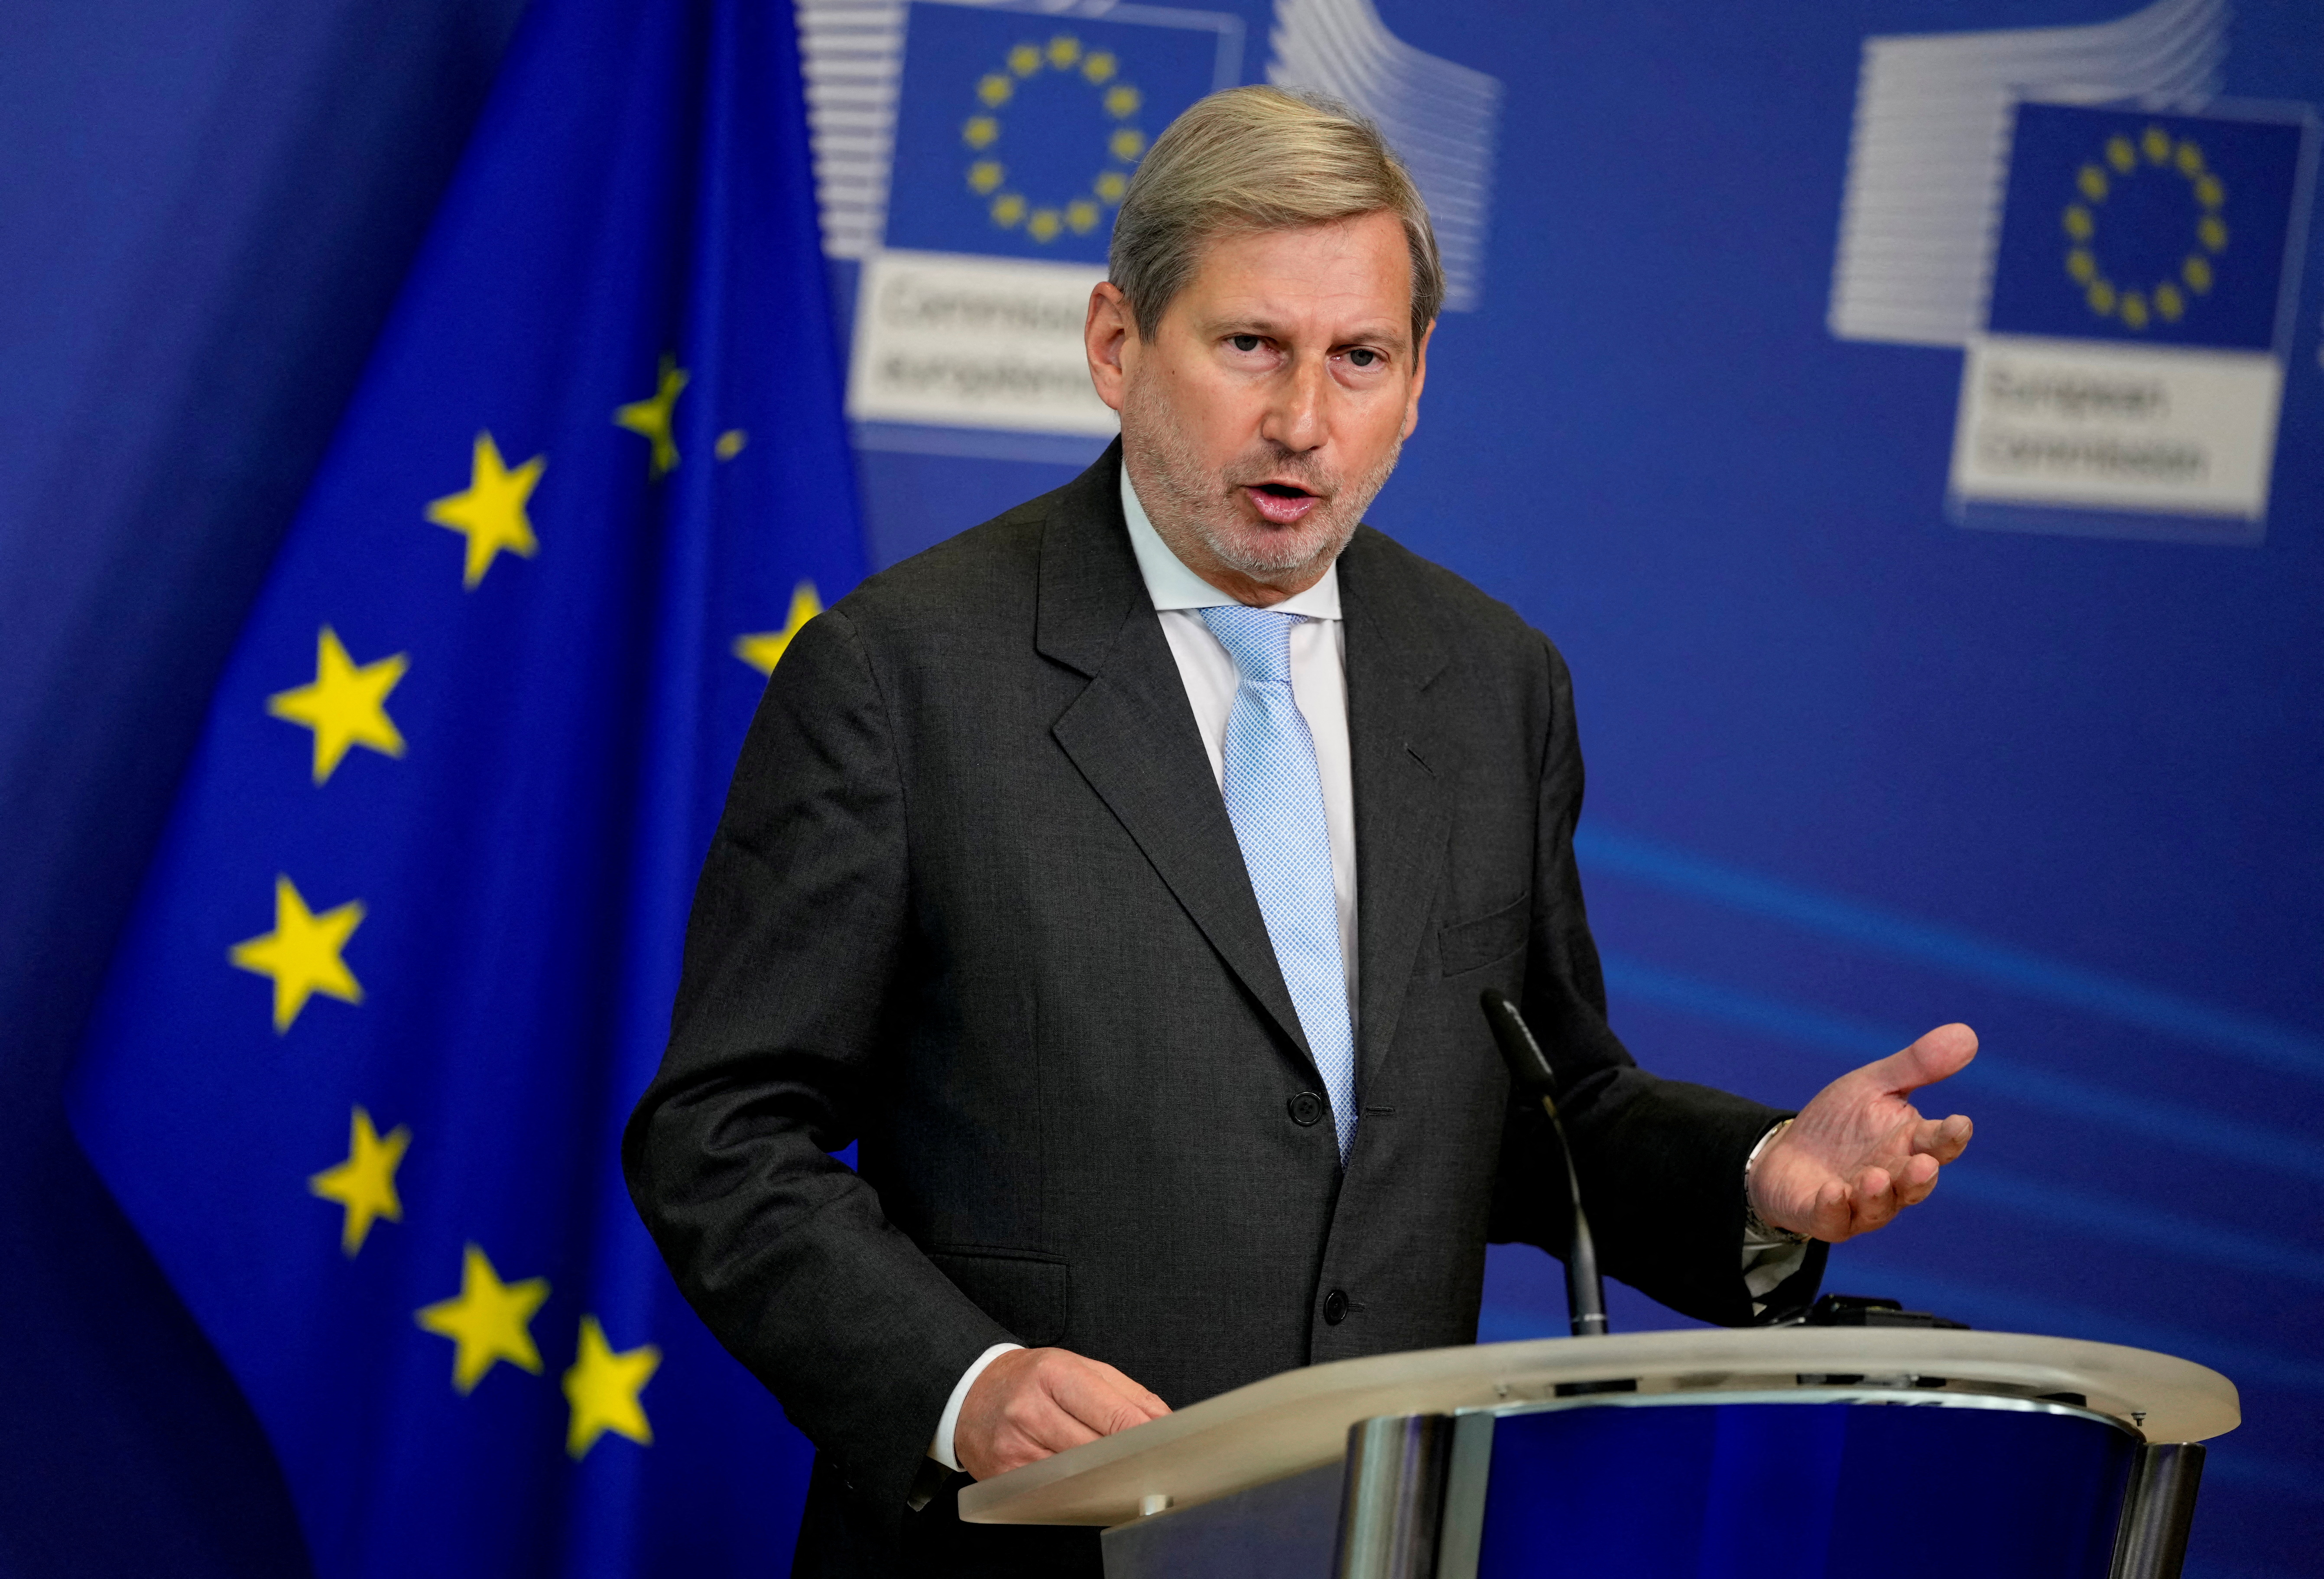 EU Commissioner for Budget and Administration Hahn addresses a media conference, in Brussels